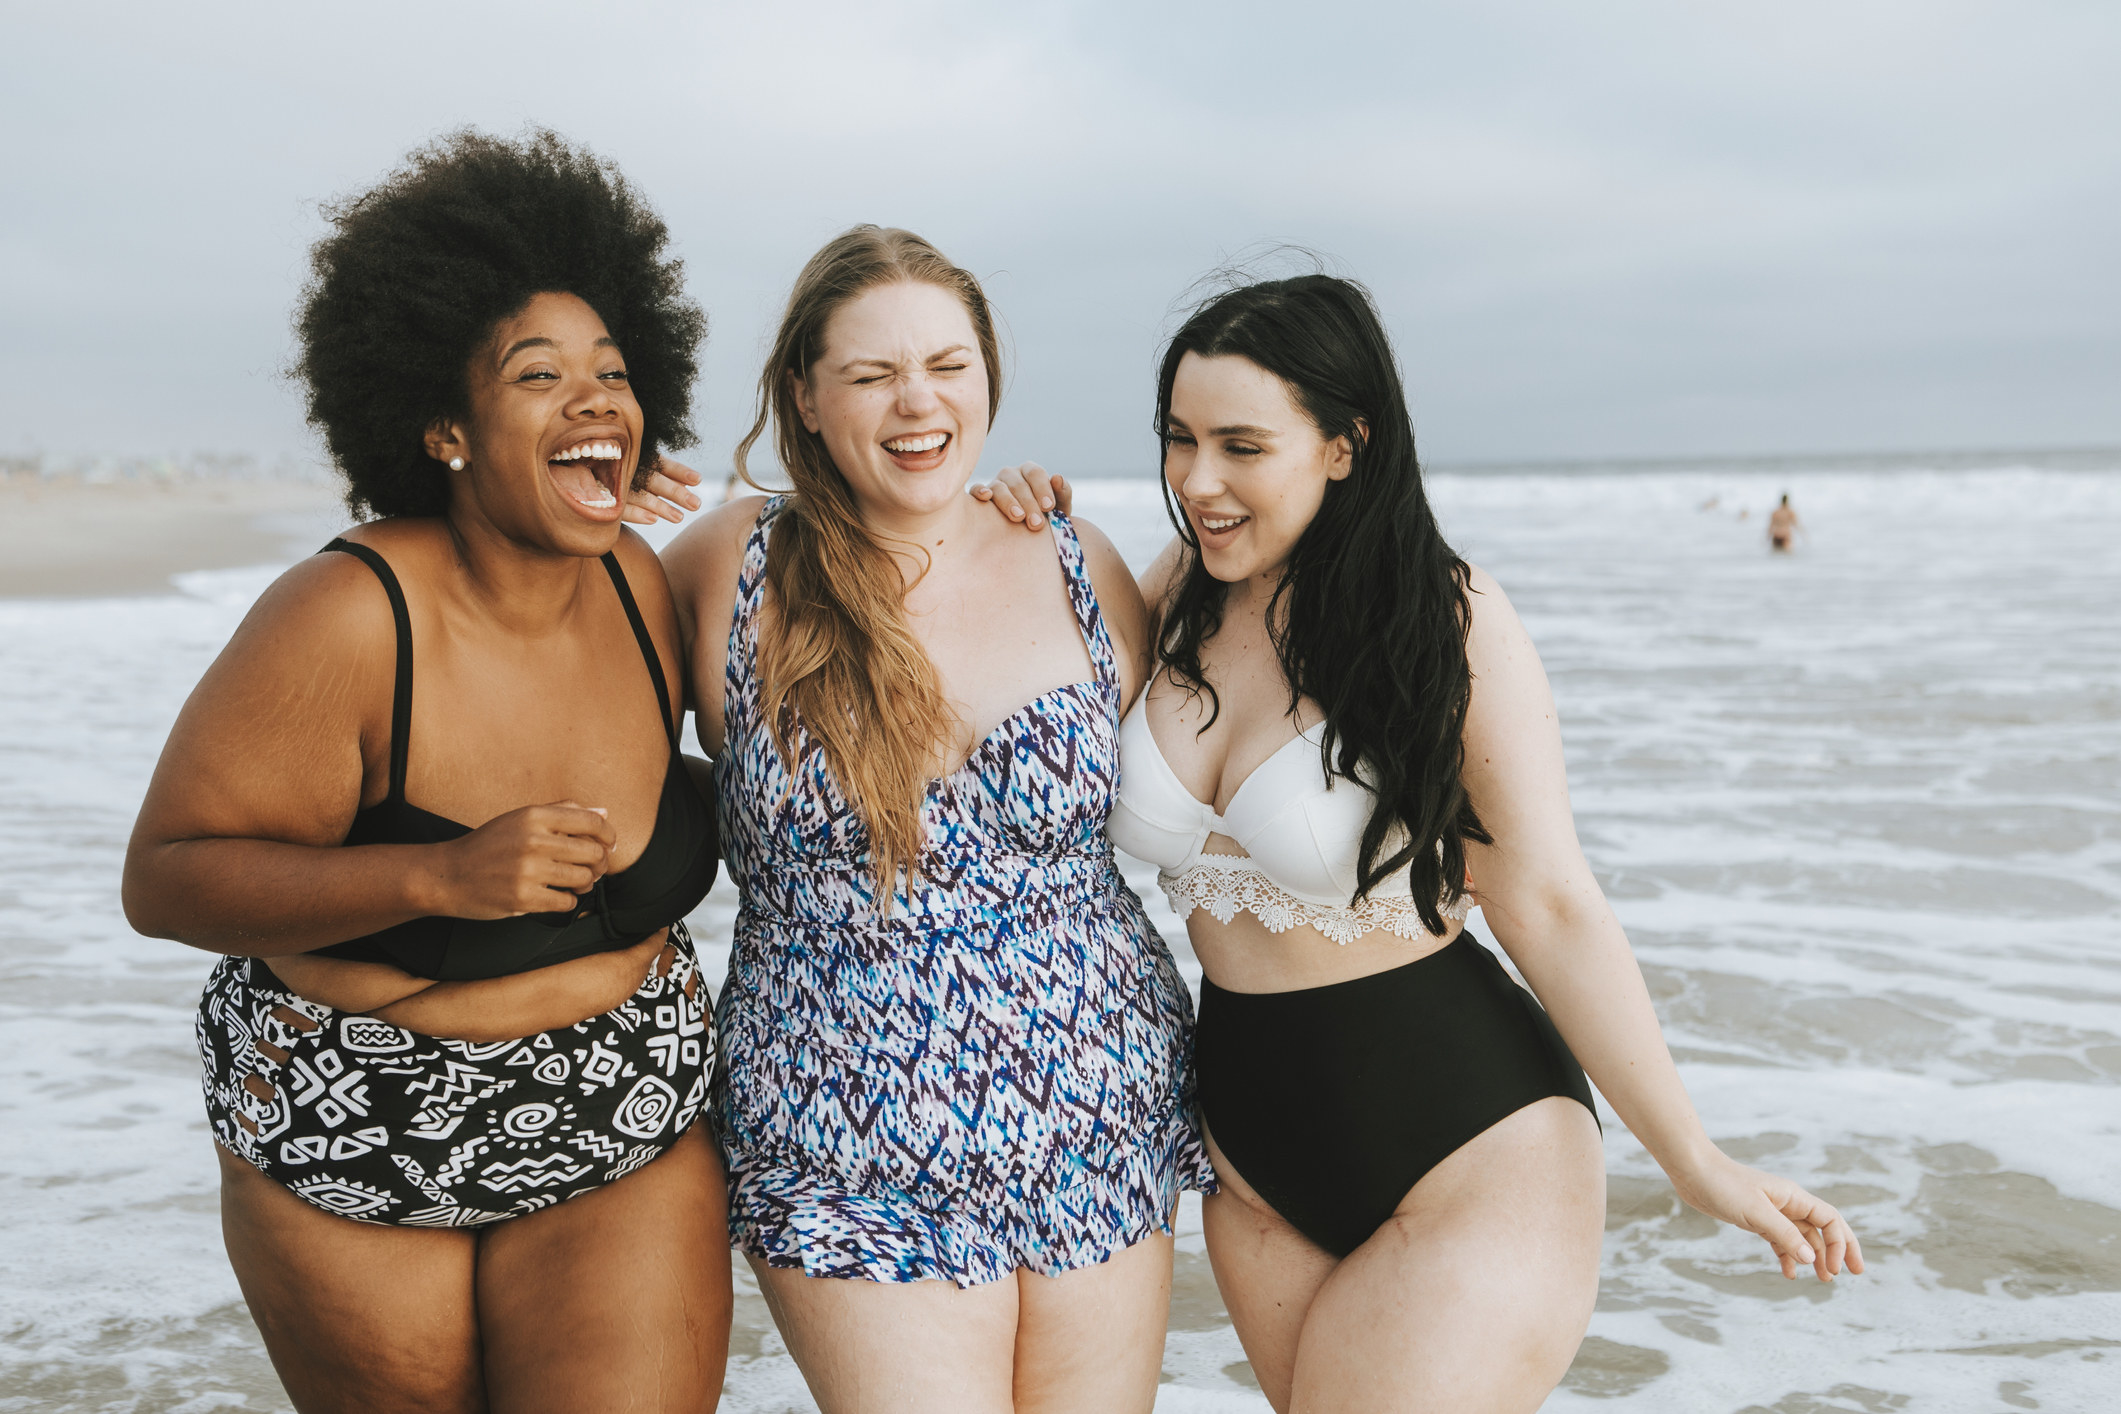 Women on the beach laughing